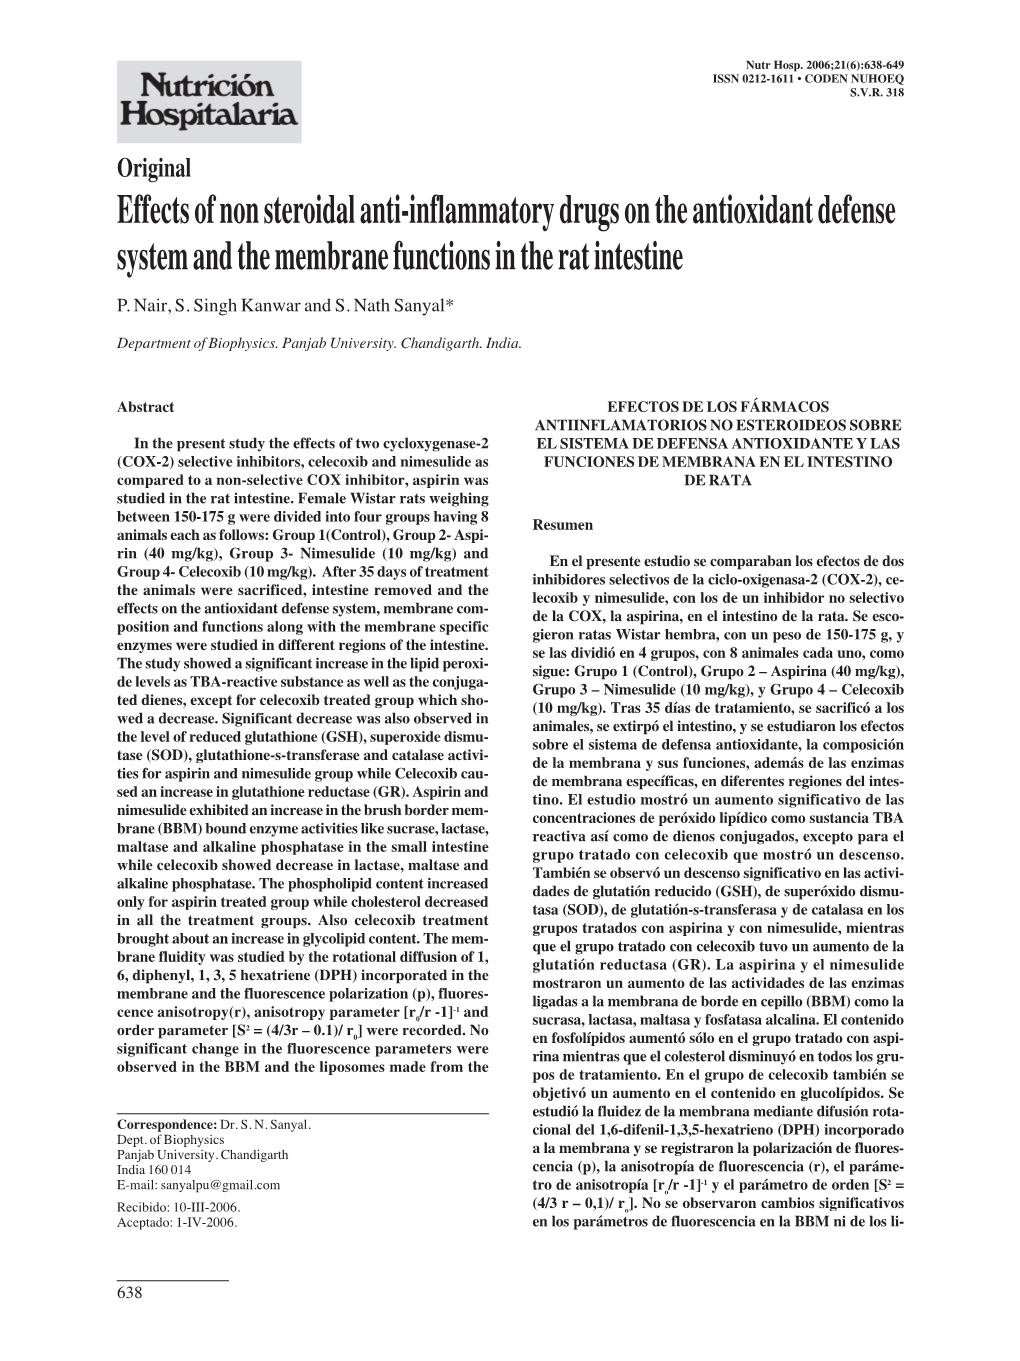 Effects of Non Steroidal Anti-Inflammatory Drugs on the Antioxidant Defense System and the Membrane Functions in the Rat Intestine